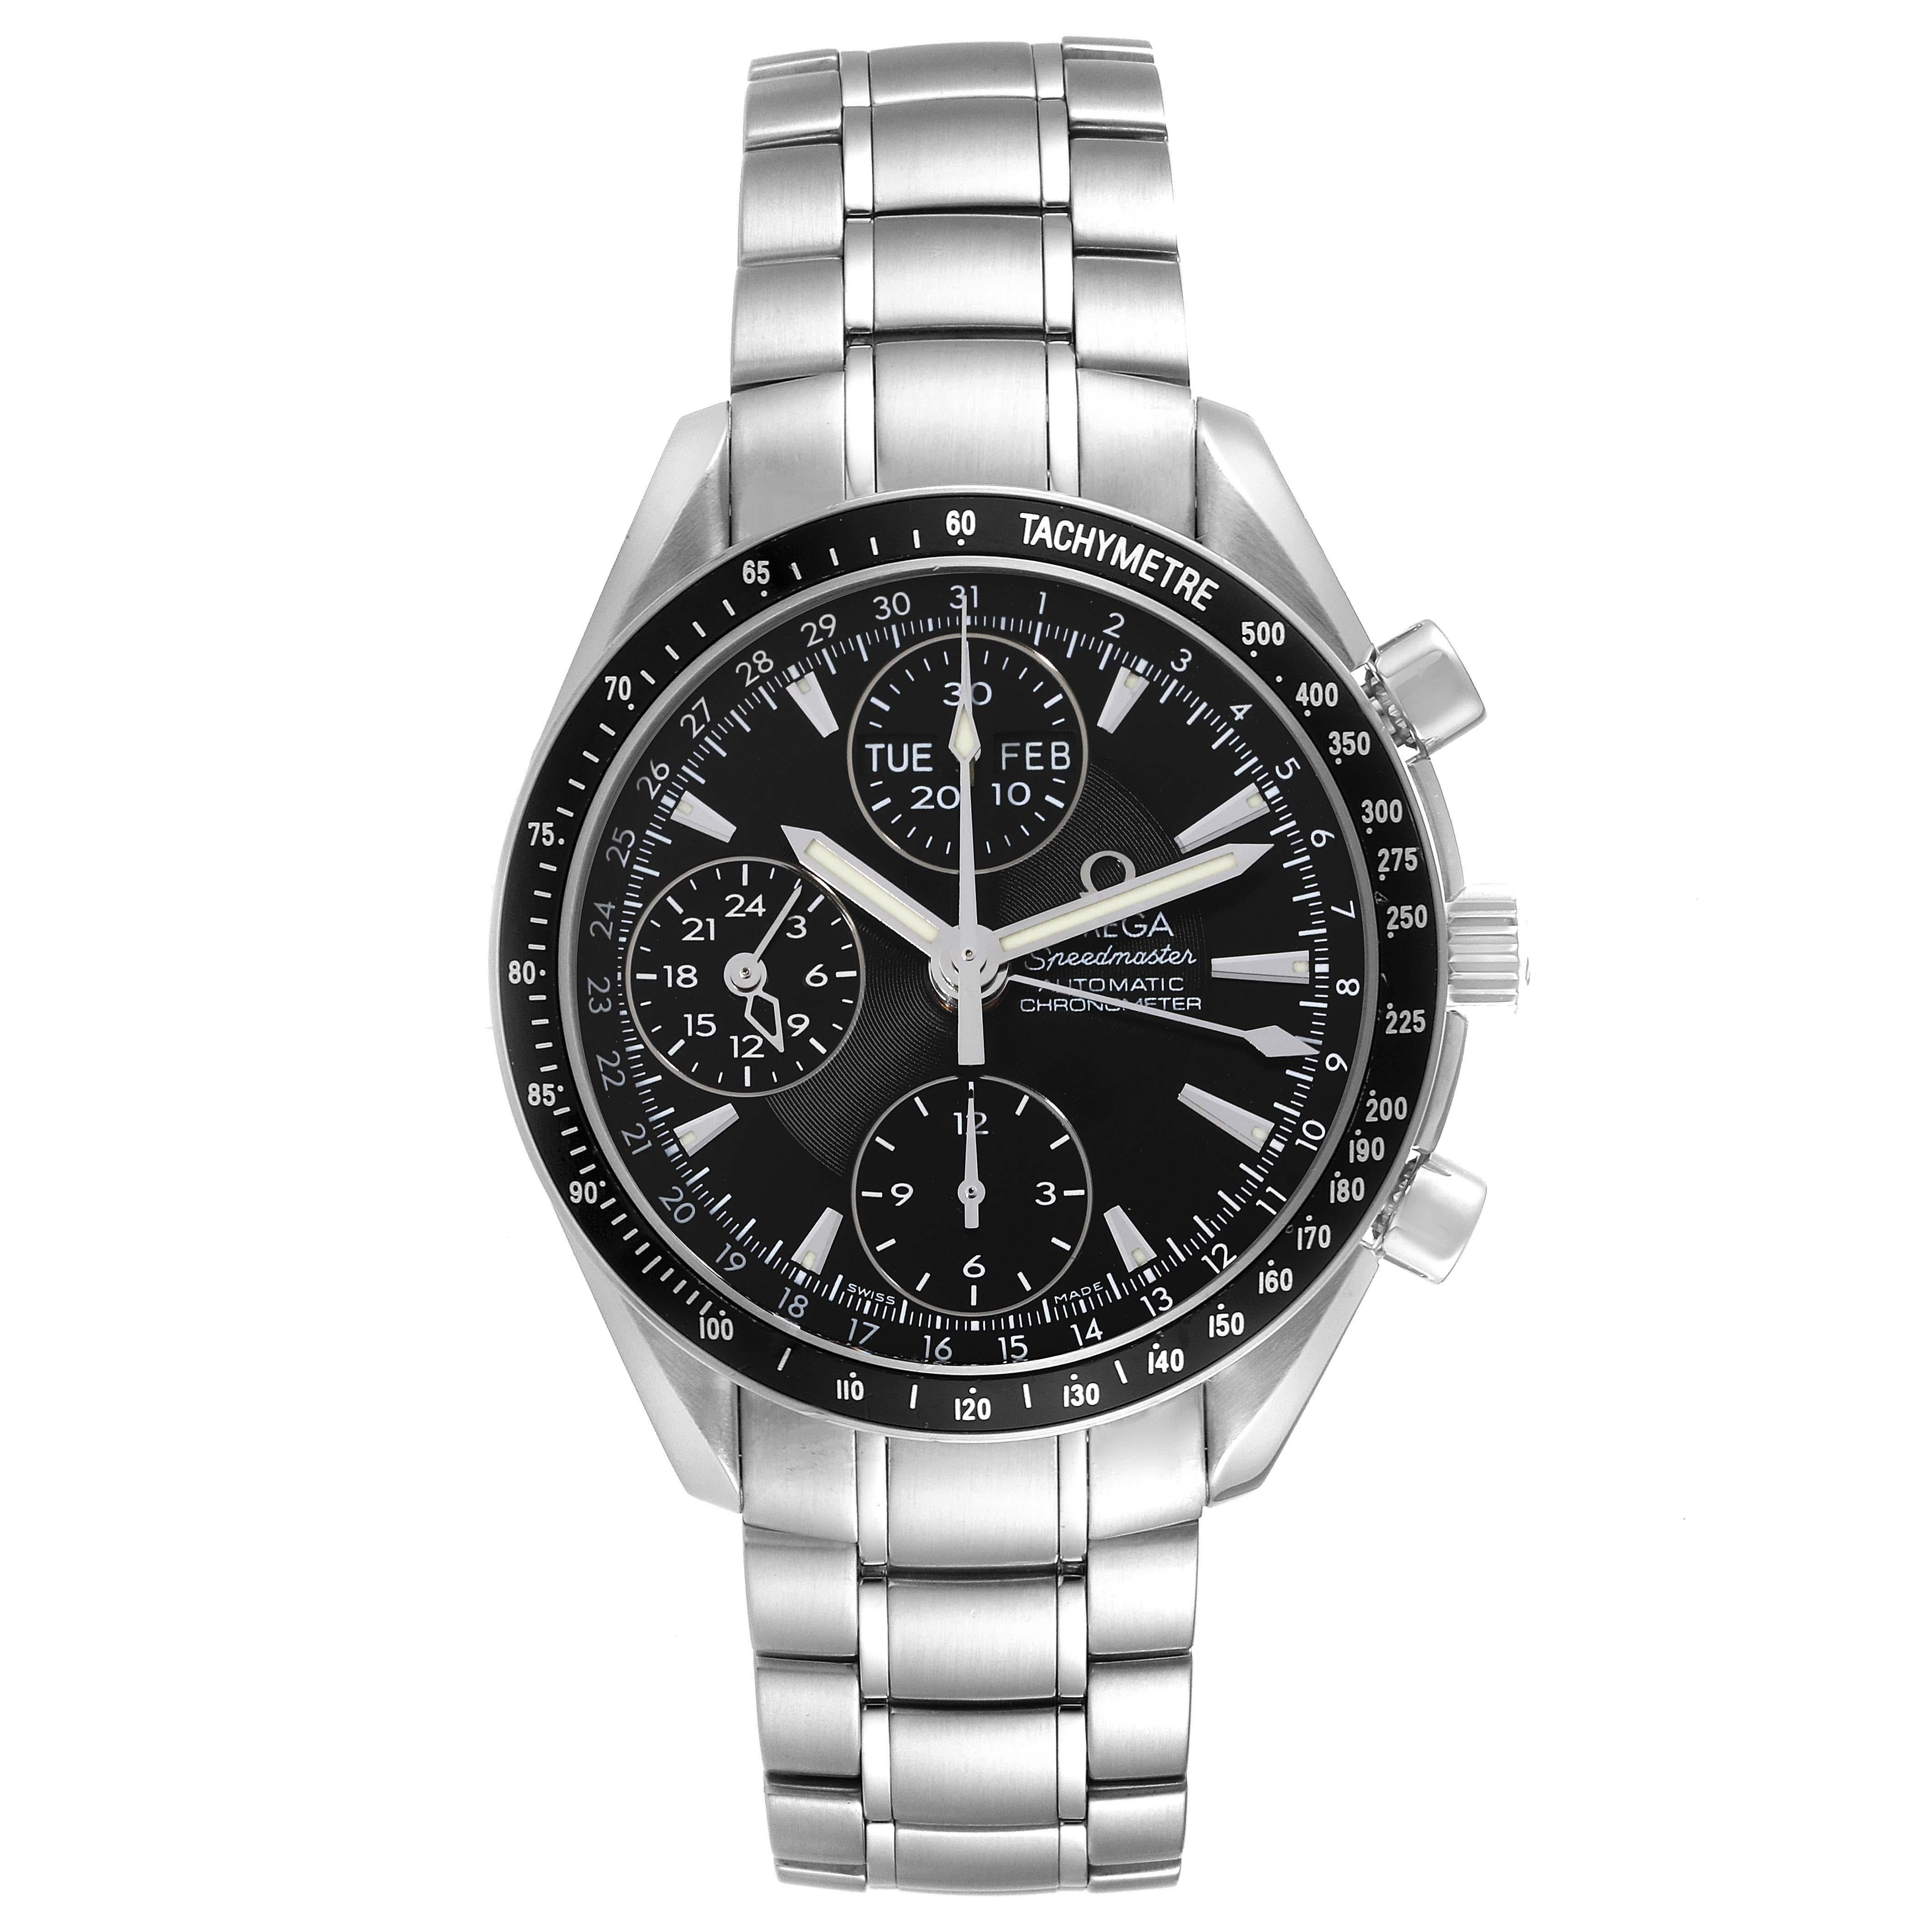 Omega Speedmaster Day-Date 40 Steel Chronograph Mens Watch 3220.50.00. Automatic self-winding chronograph movement. Stainless steel round case 40 mm in diameter. Stainless steel bezel with black tachymeter insert. Anti-reflective scratch resistant